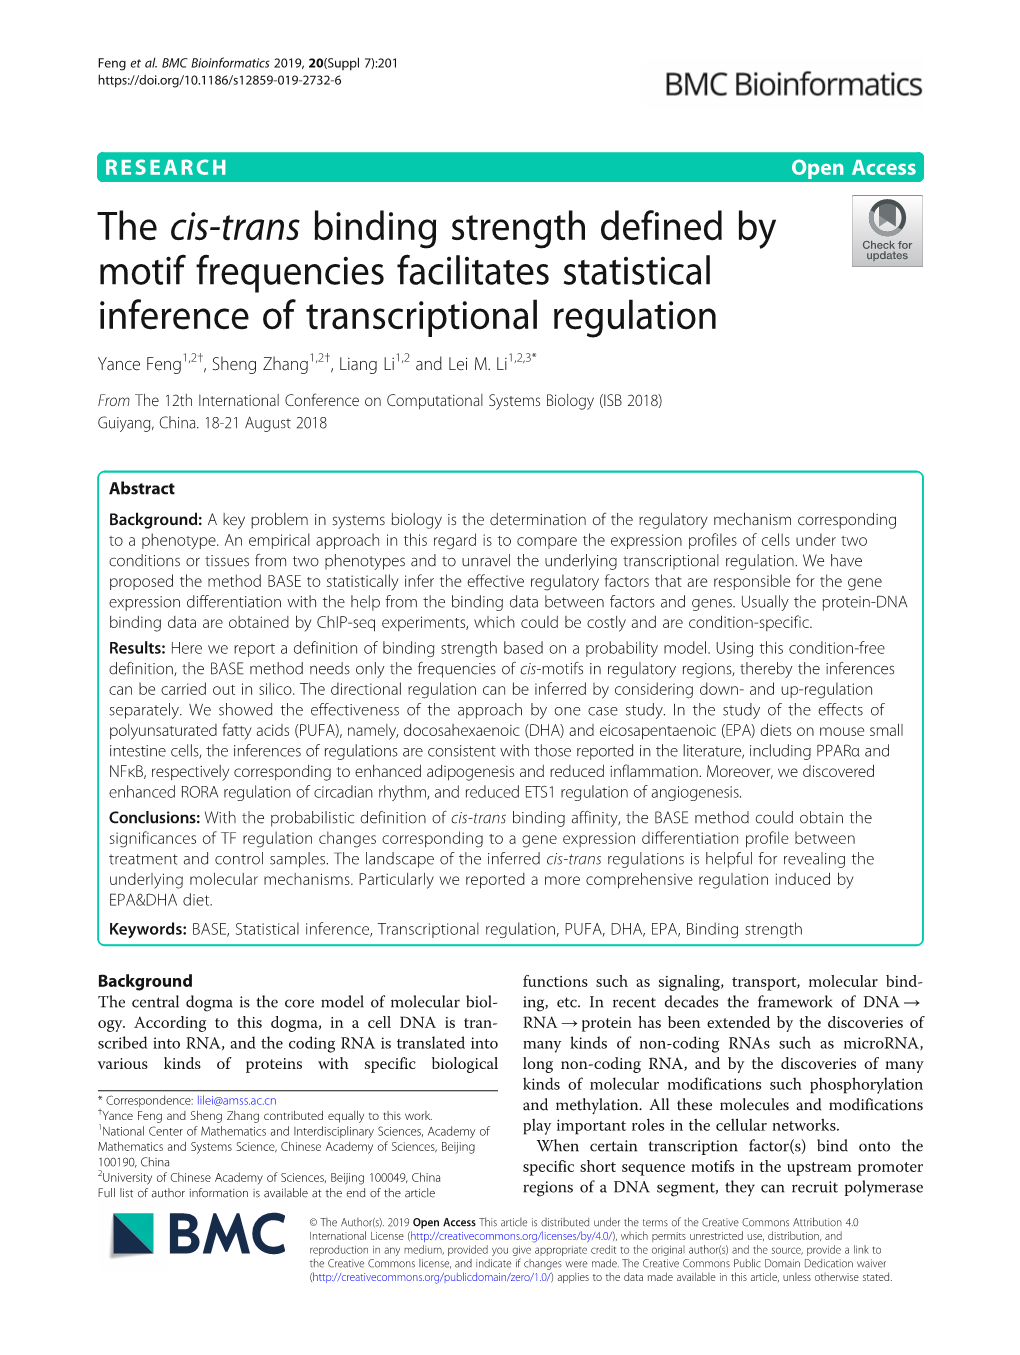 The Cis-Trans Binding Strength Defined by Motif Frequencies Facilitates Statistical Inference of Transcriptional Regulation